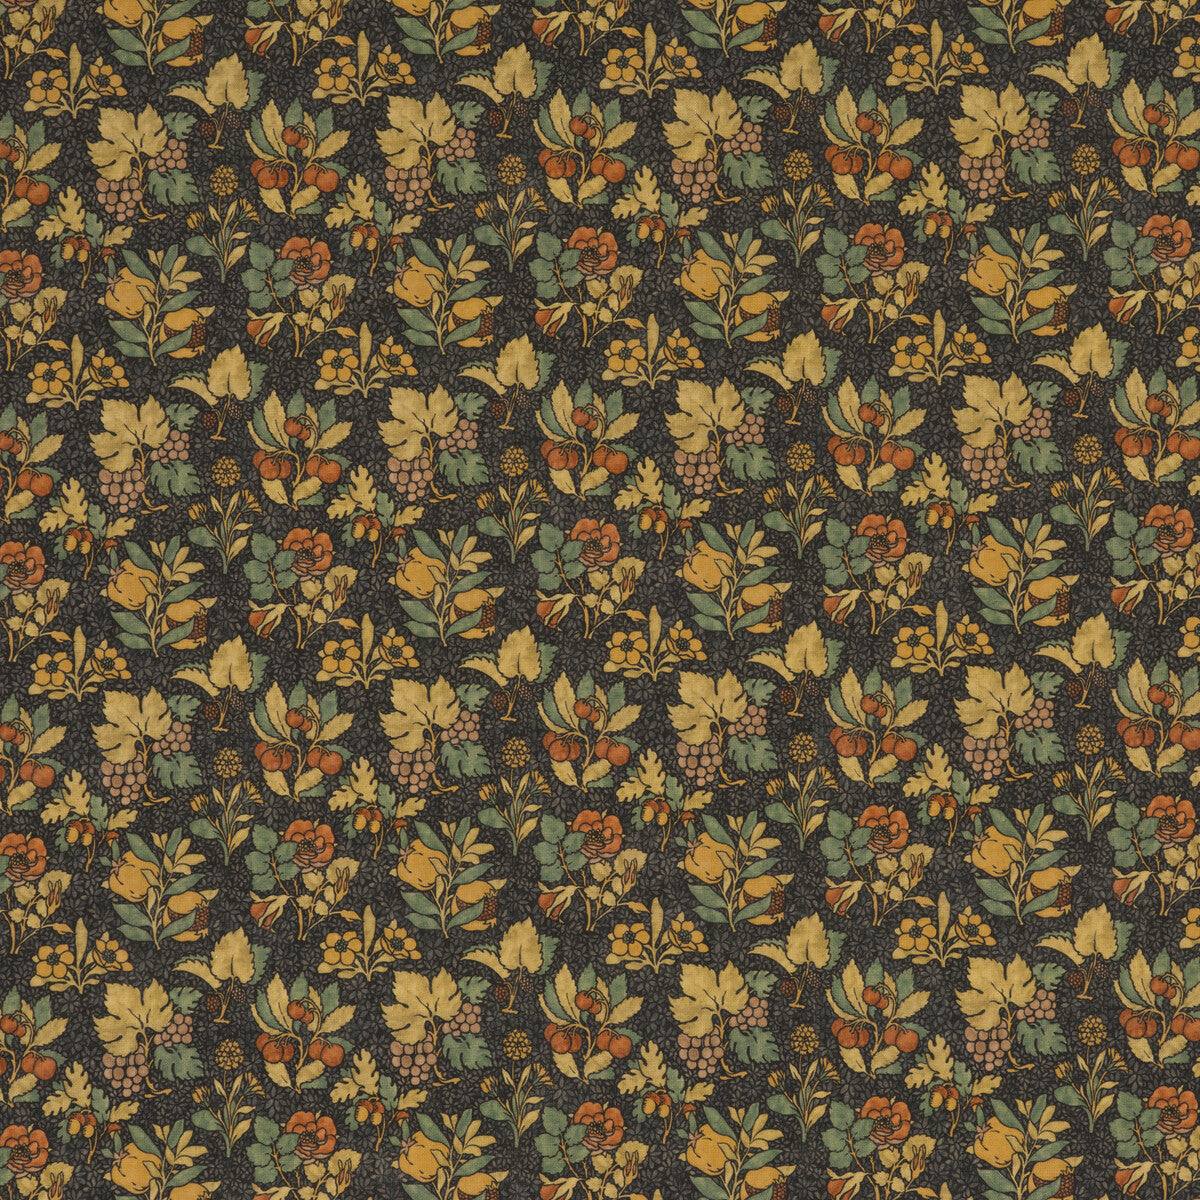 Meadow Fruit fabric in indigo/multi color - pattern BP10619.1.0 - by G P &amp; J Baker in the Originals V collection